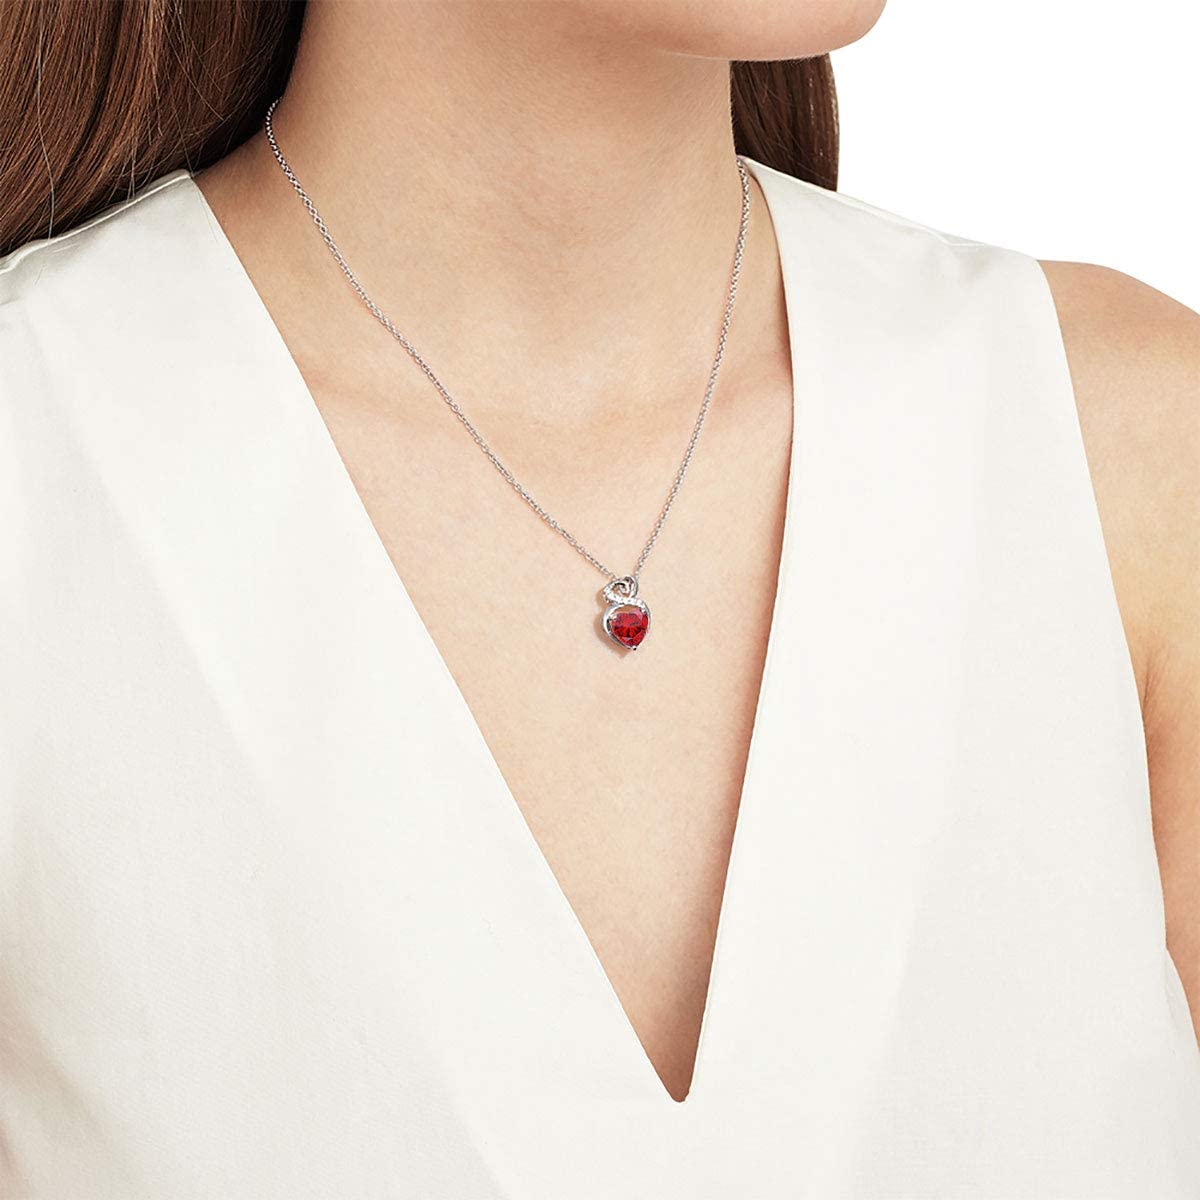 FANCIME "Infinity Heart" Ruby July Gemstone Sterling Silver Necklace Show